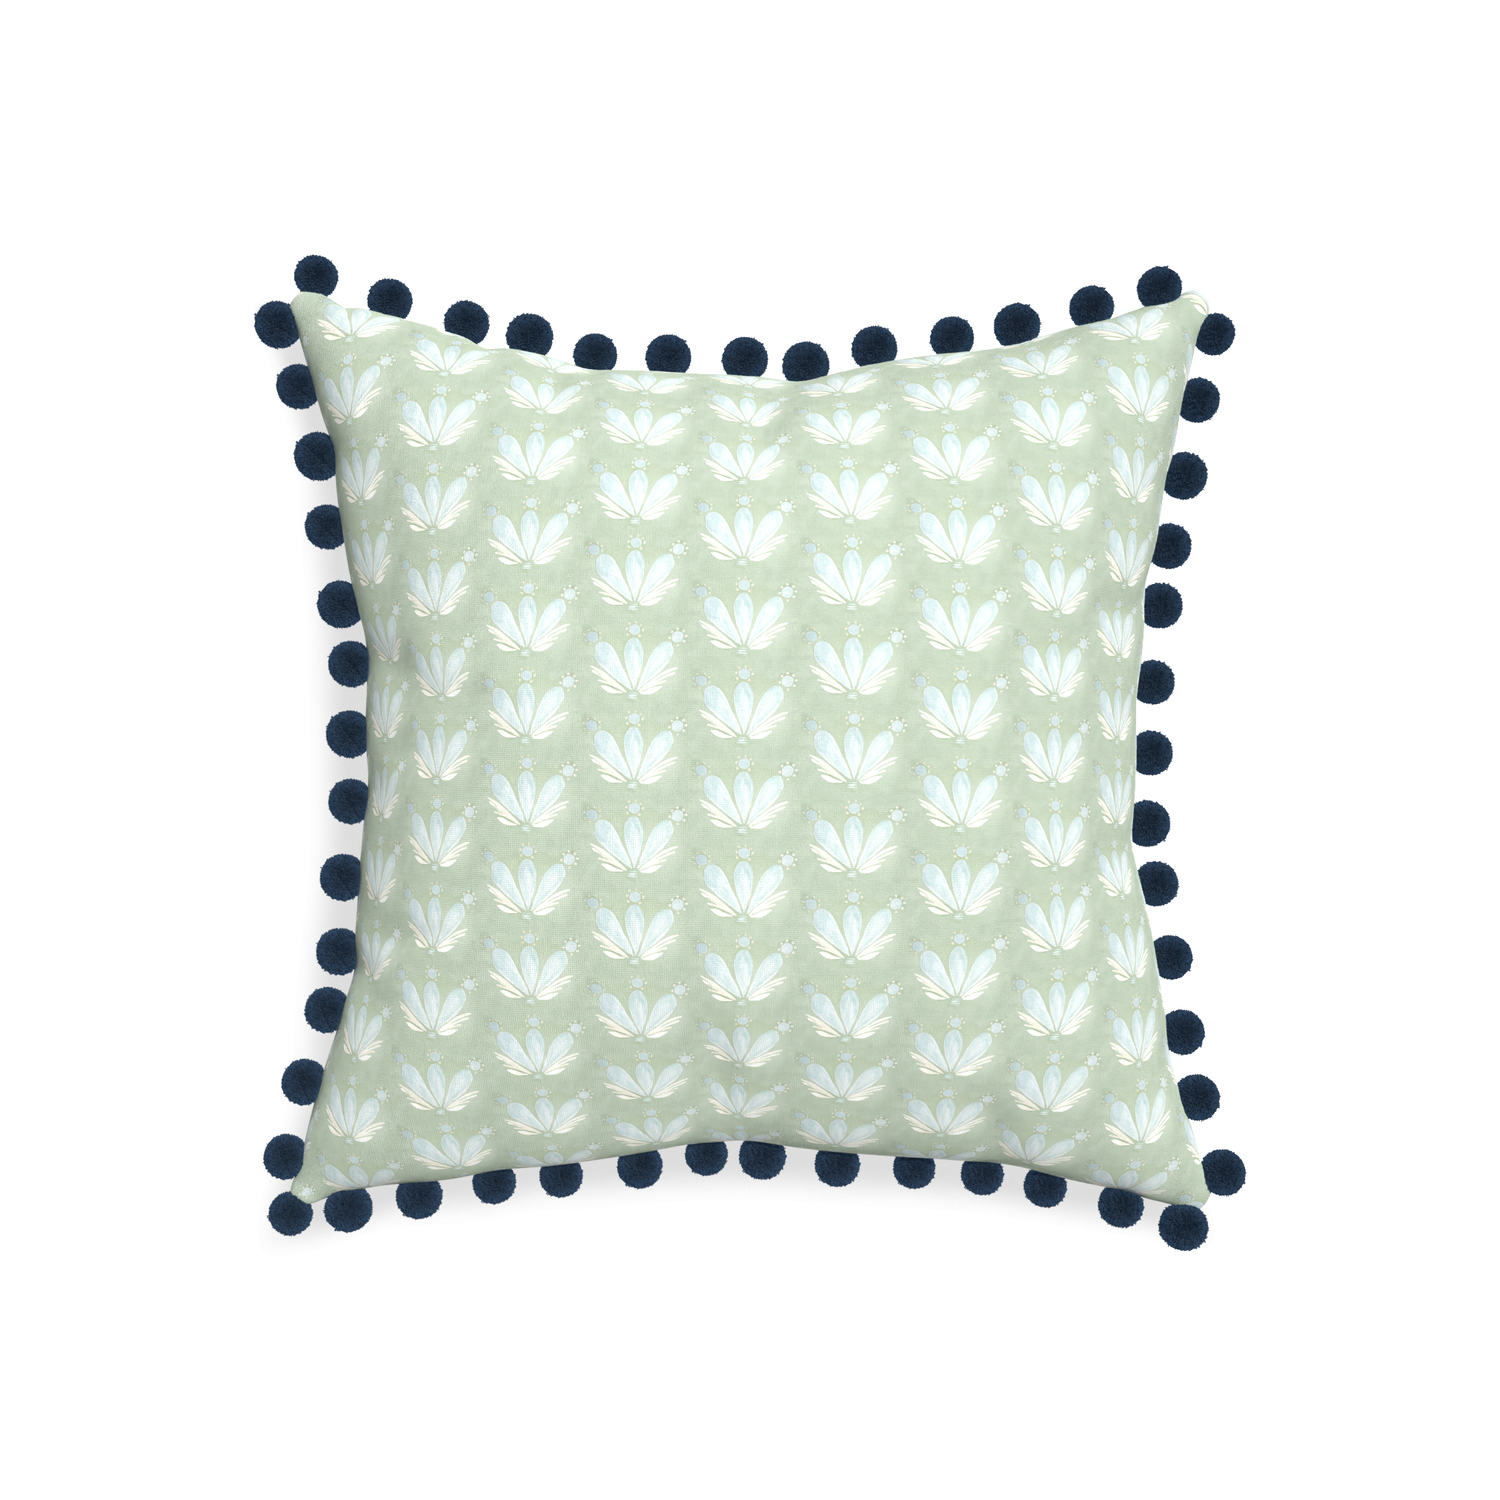 20-square serena sea salt custom blue & green floral drop repeatpillow with c on white background